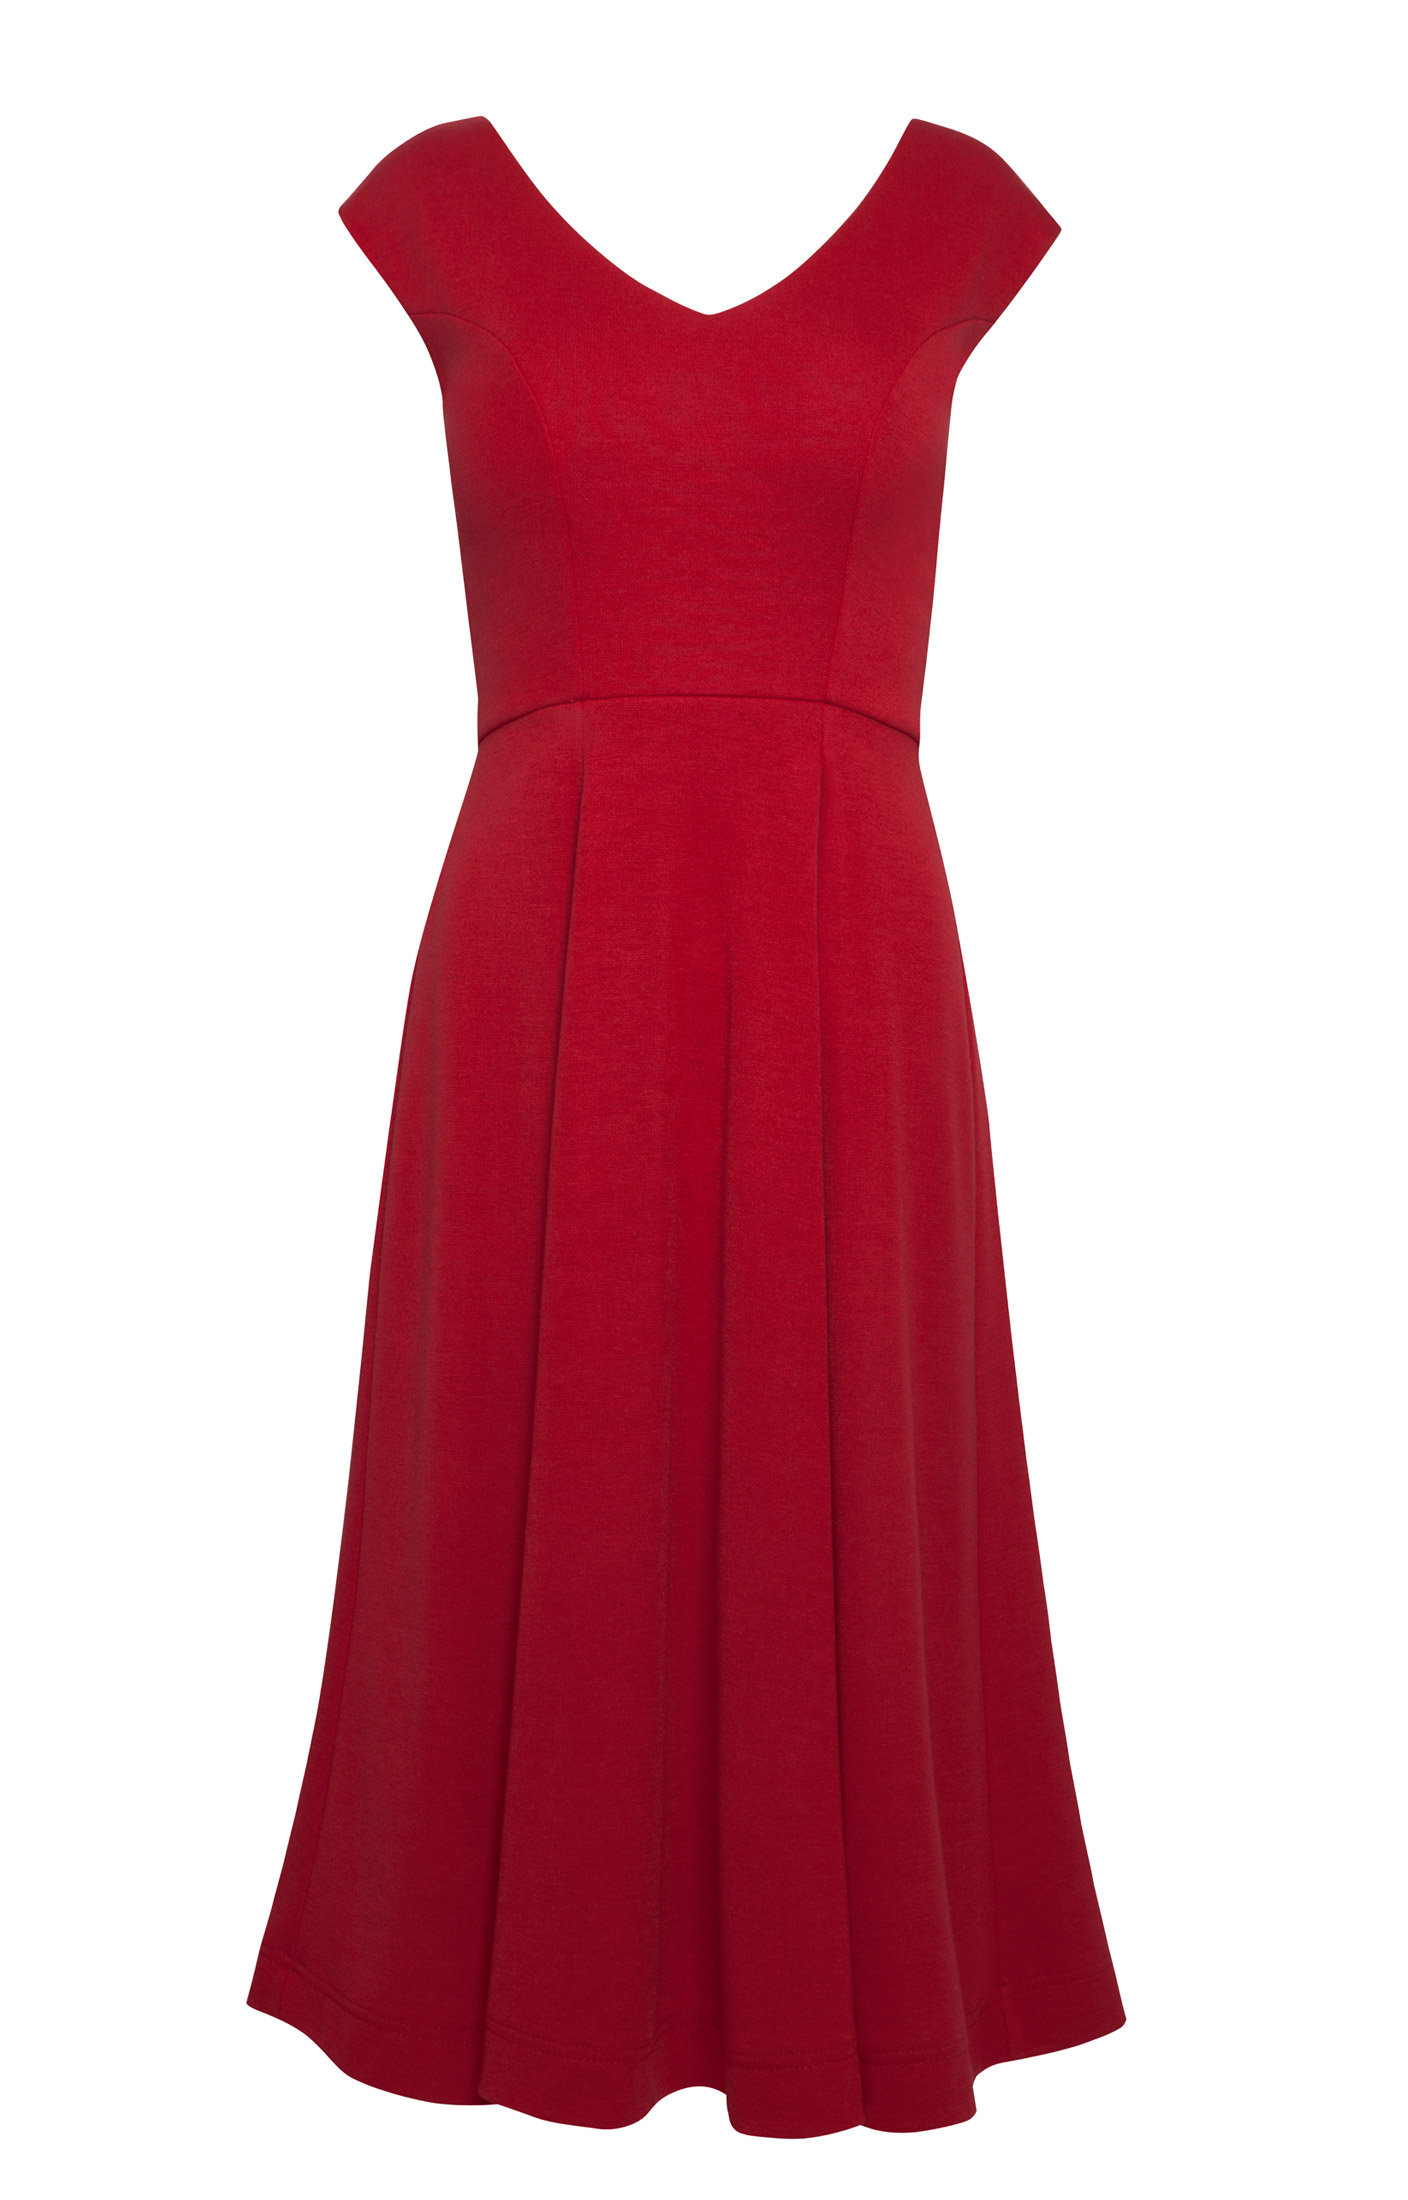 Olivia Day Dress (Chilli Pepper) - Wedding Dresses, Evening Wear and Party  Clothes by Alie Street.